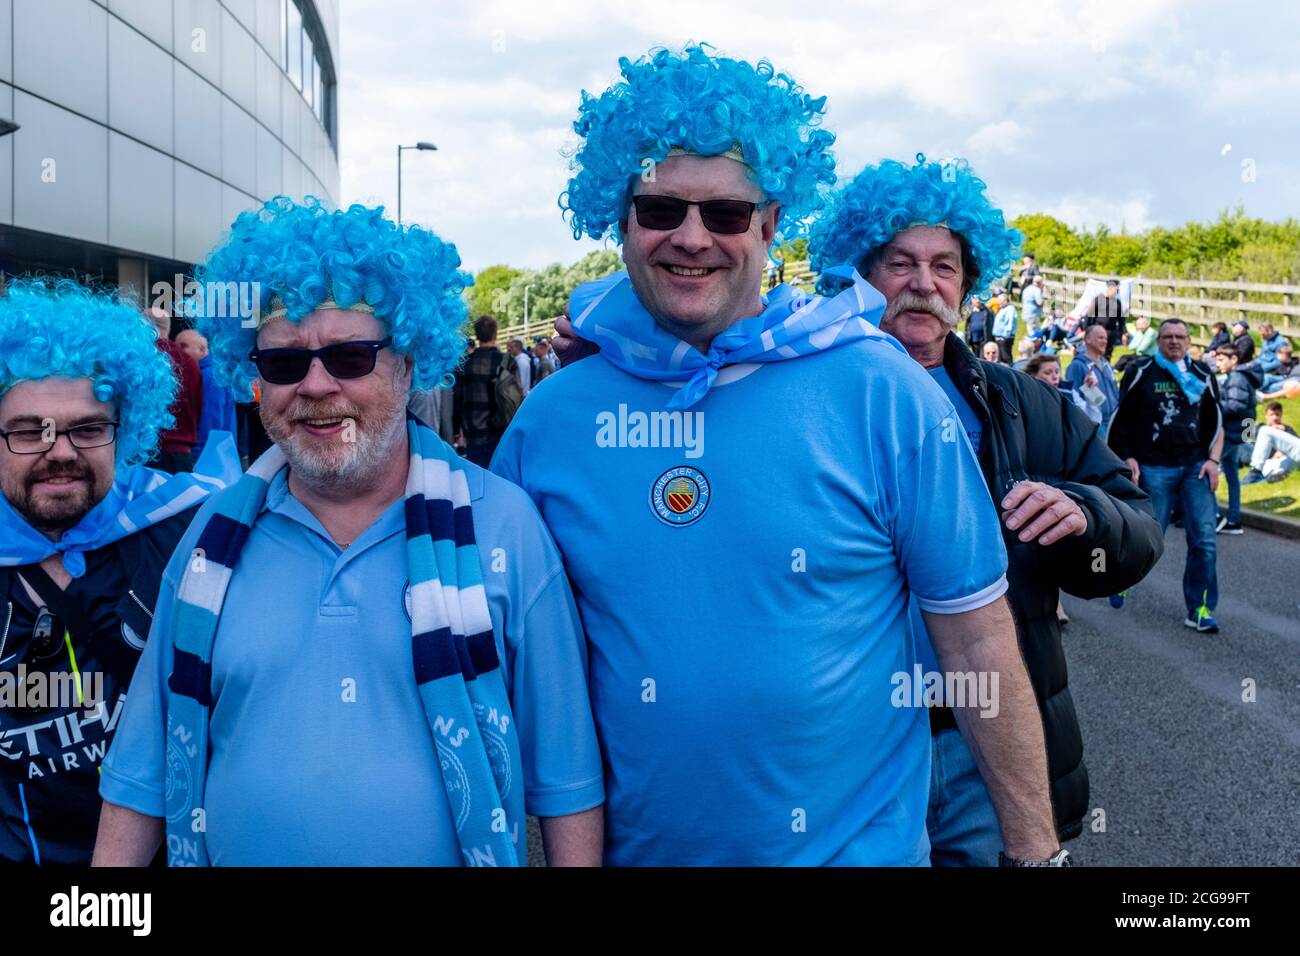 Manchester City Fans Arrive At The Amex Stadium For Their Final Game Of The Season and Premier League Title Clincher Against Brighton and Hove Albion. Stock Photo